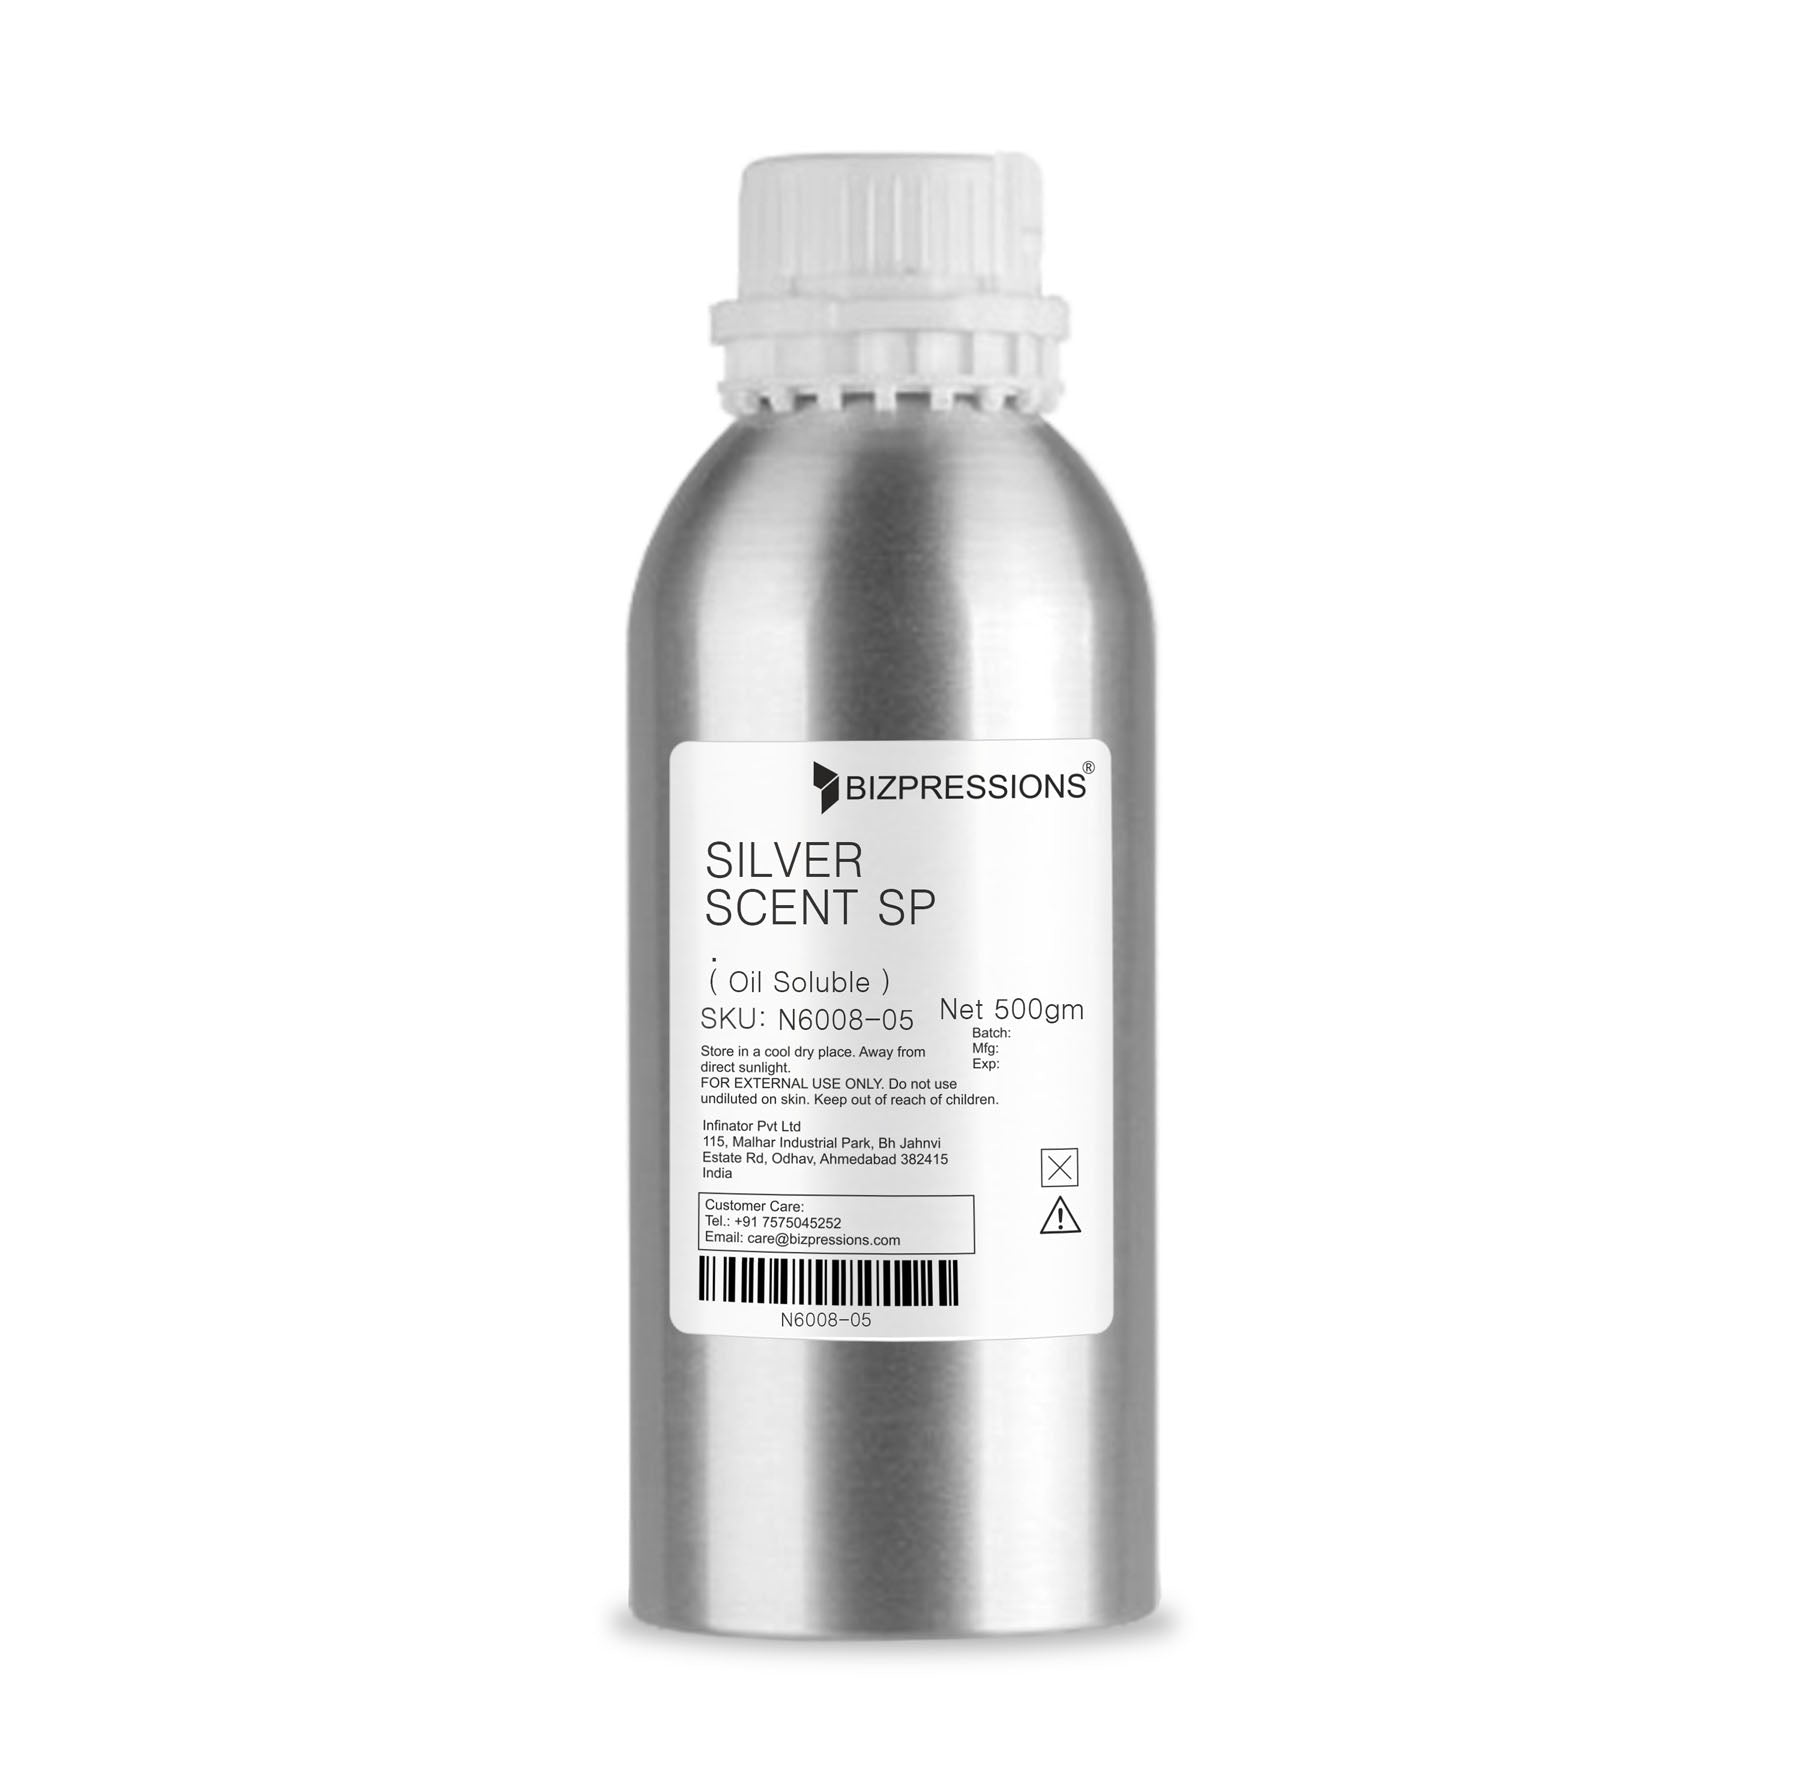 SILVER SCENT SP - Fragrance ( Oil Soluble ) - 500 gm